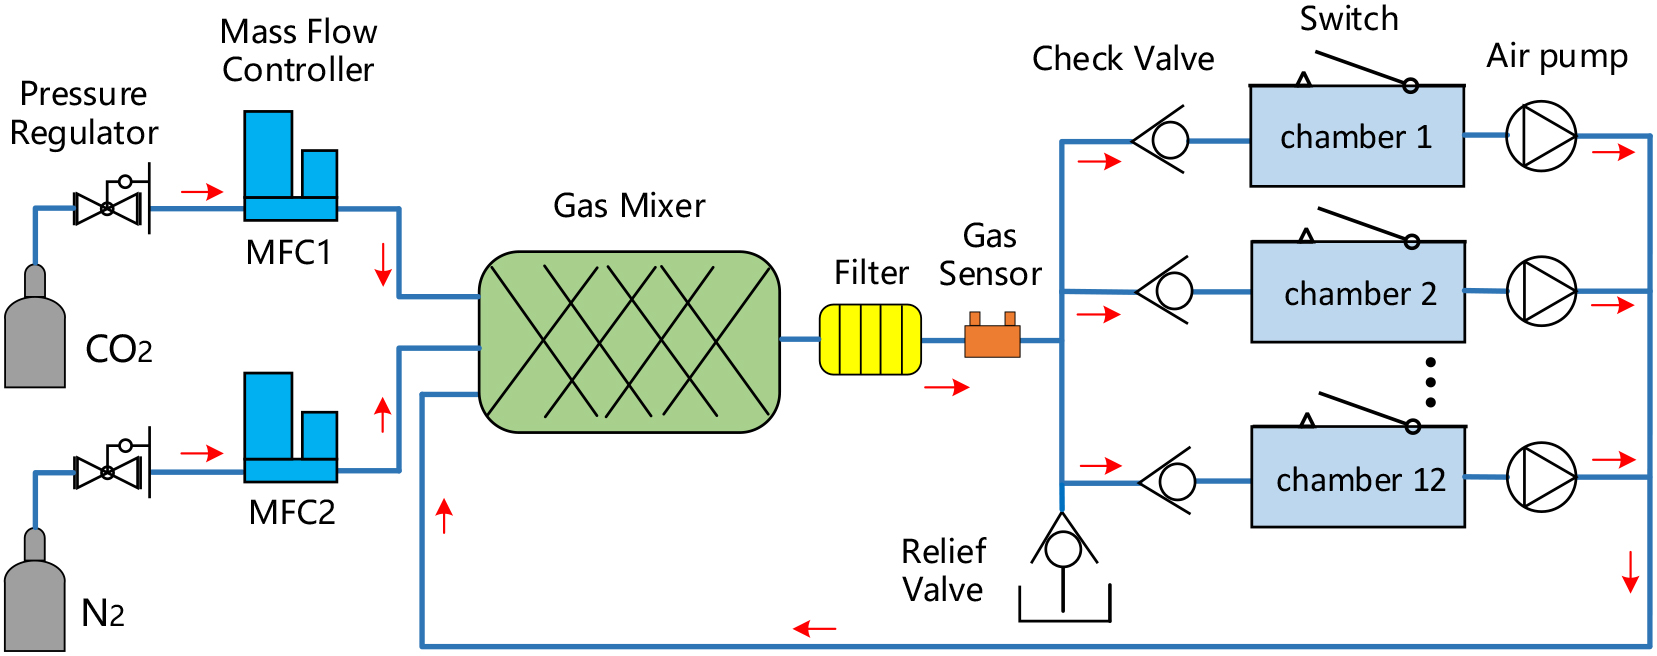 Schematic of the gas mixing and distribution system for a multi-chamber embryo incubator. The red arrows indicate the gas flow direction.